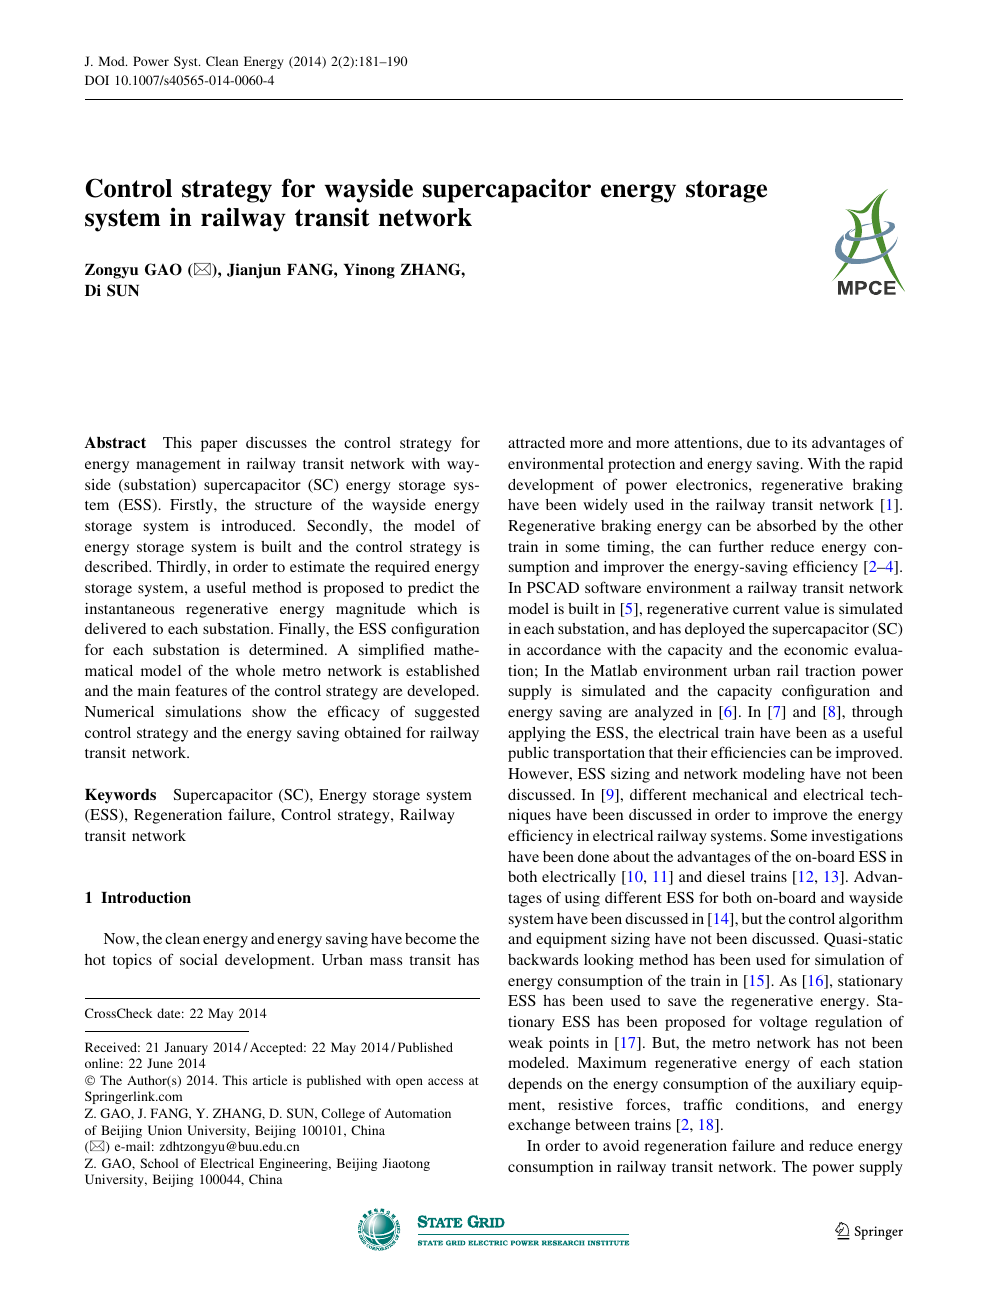 Control Strategy For Wayside Supercapacitor Energy Storage System In Railway Transit Network Topic Of Research Paper In Electrical Engineering Electronic Engineering Information Engineering Download Scholarly Article Pdf And Read For Free